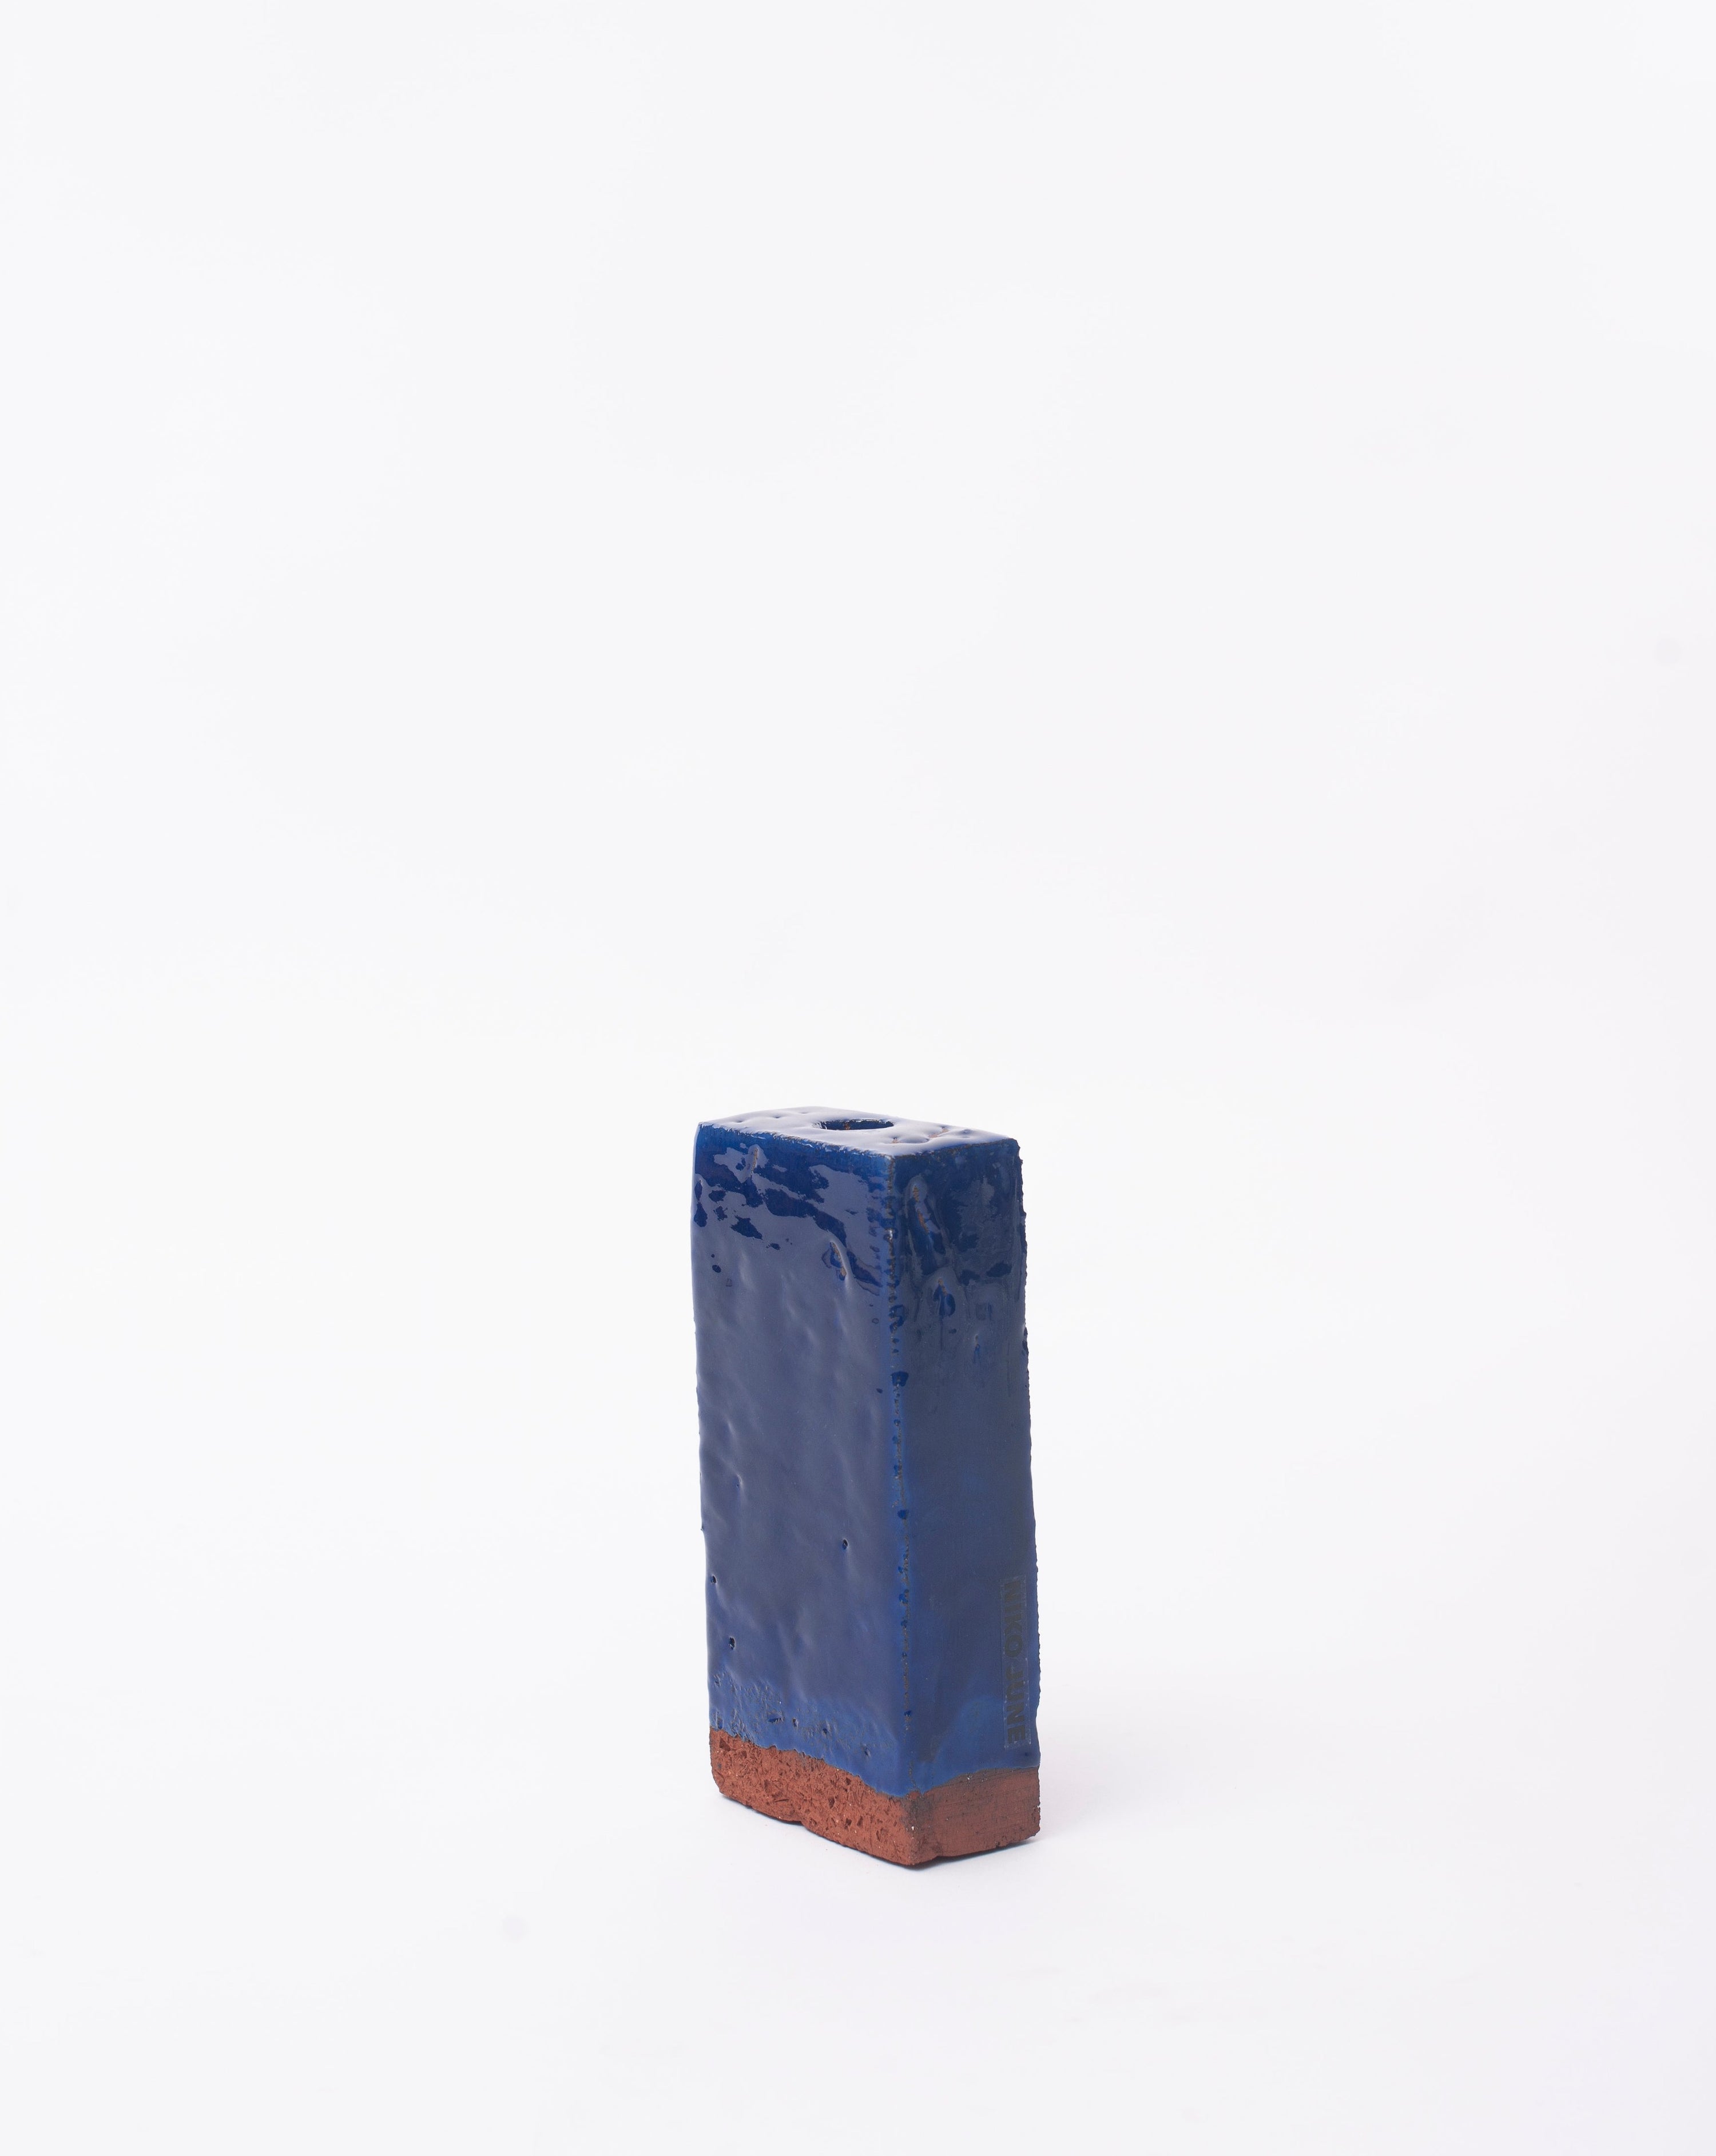 Handmade dark brick ceramic candle holder in white glaze in white background with right side view